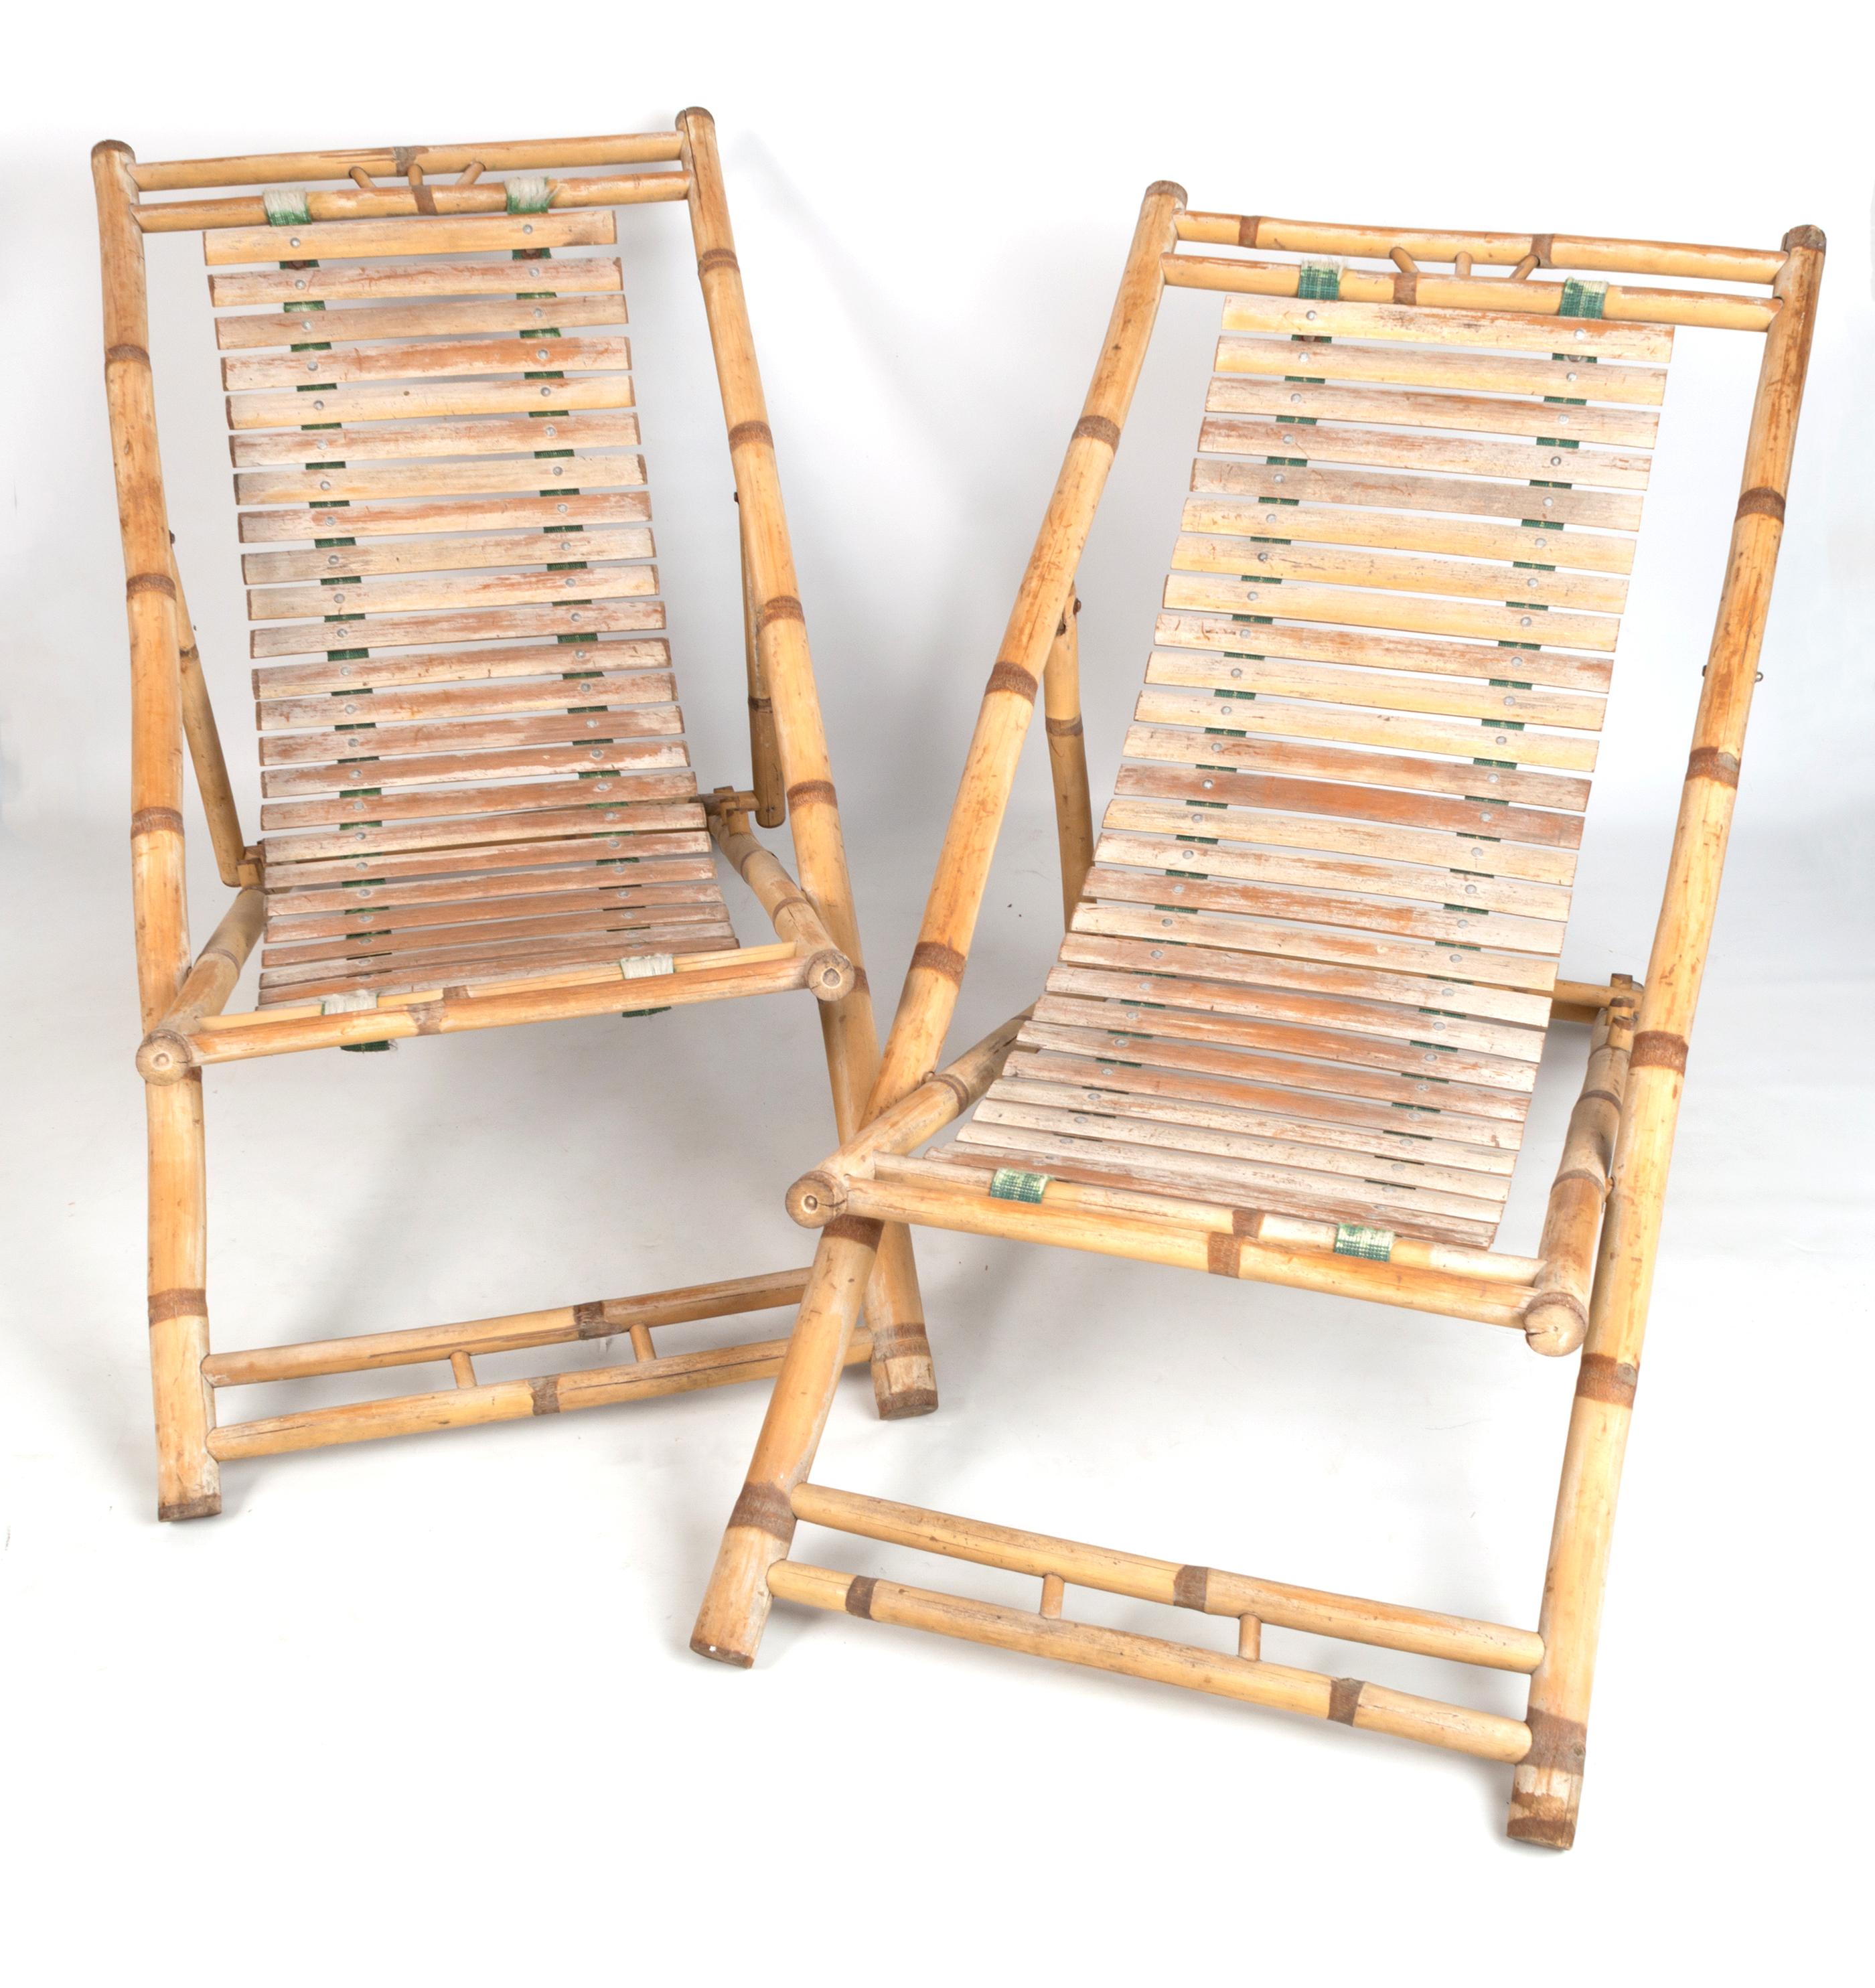 Pair of bamboo deck chairs sun loungers C.1980, Italy

Dimensions when flat: L 137 W 60 D 10cm.

